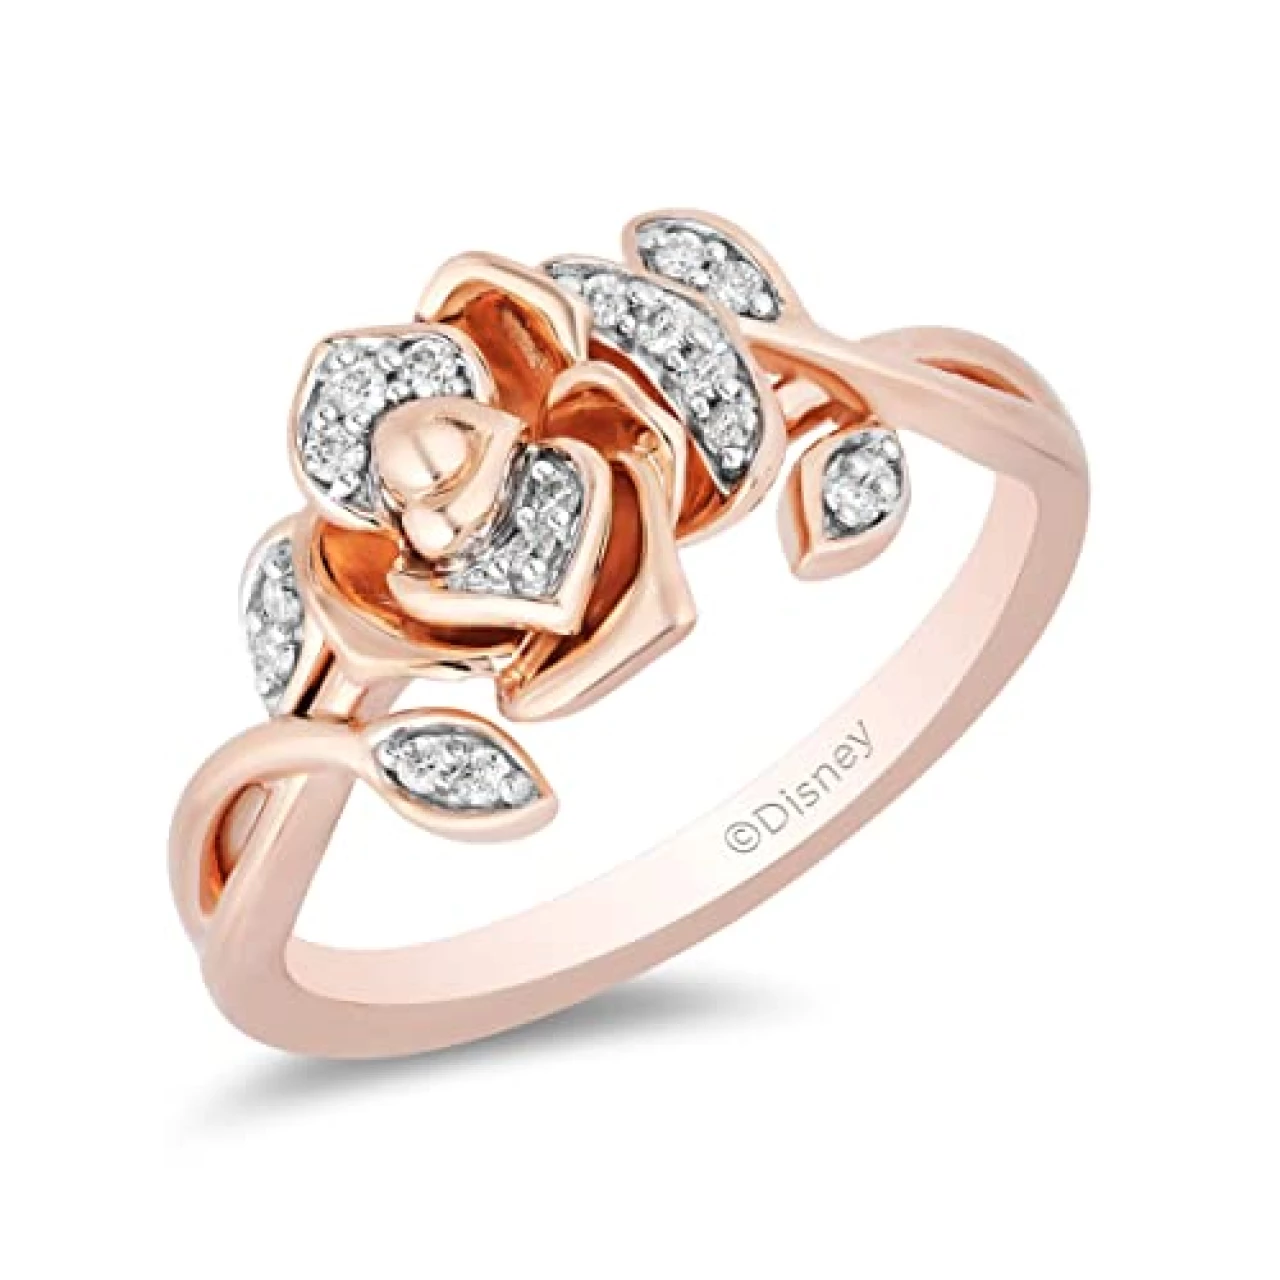 Jewelili Enchanted Disney Fine Jewelry 14K Rose Gold Over Sterling Silver 1/10 Cttw White Round Diamond Belle